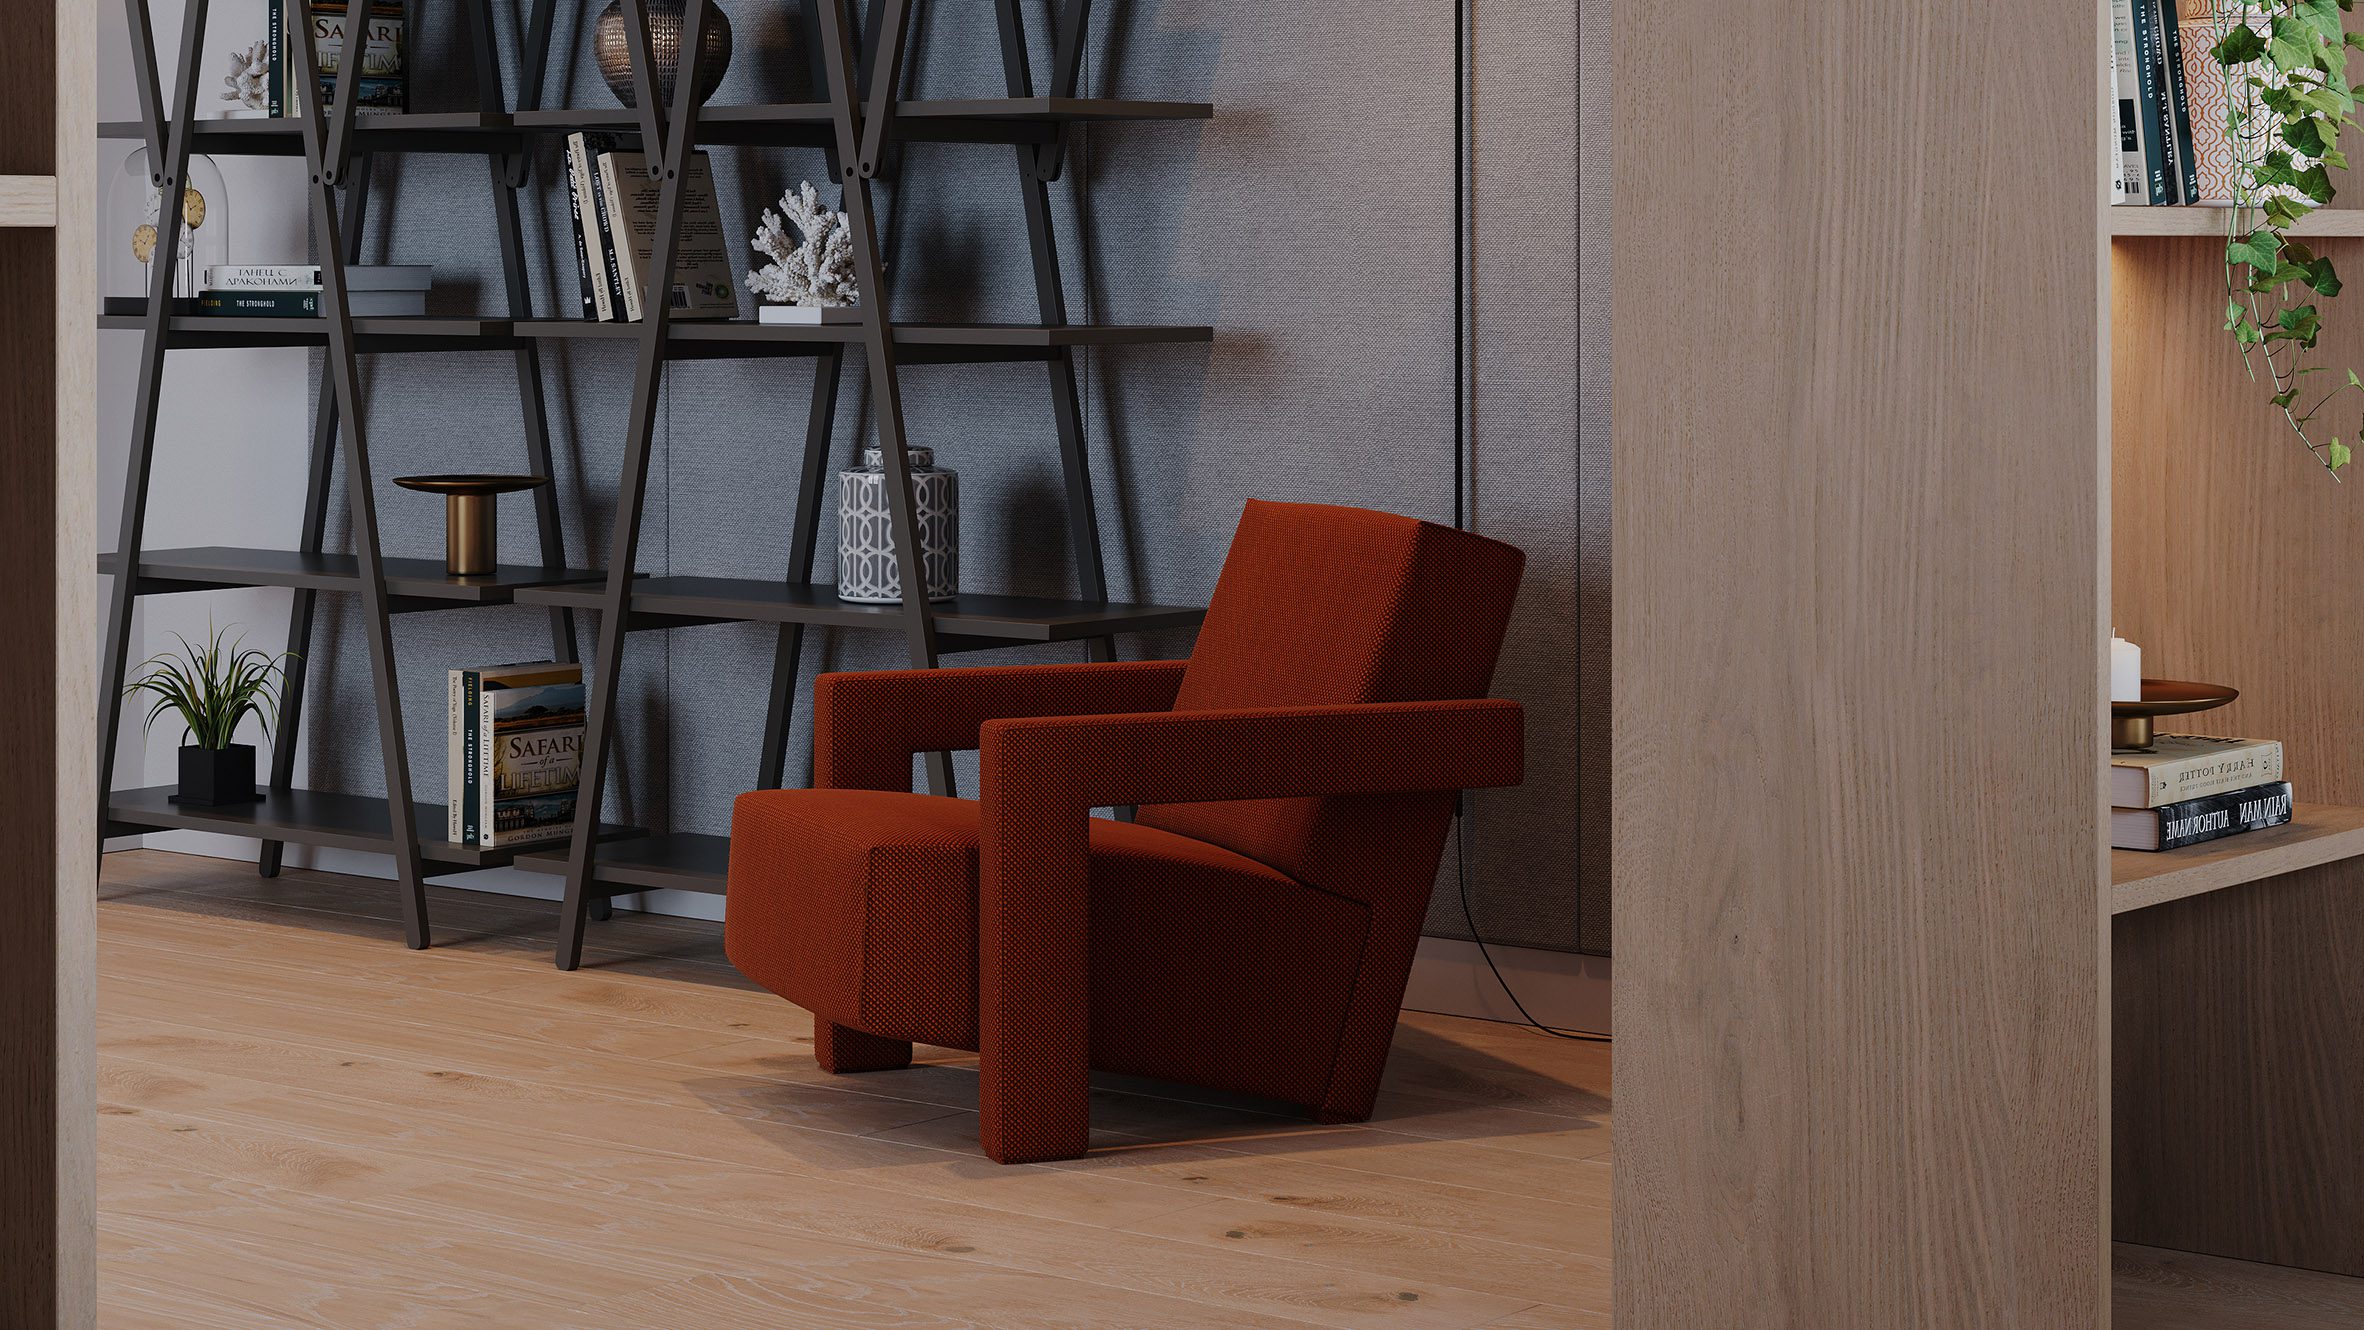 Portugees Kolonel span Utrecht armchair by Gerrit T Rietveld for Cassina